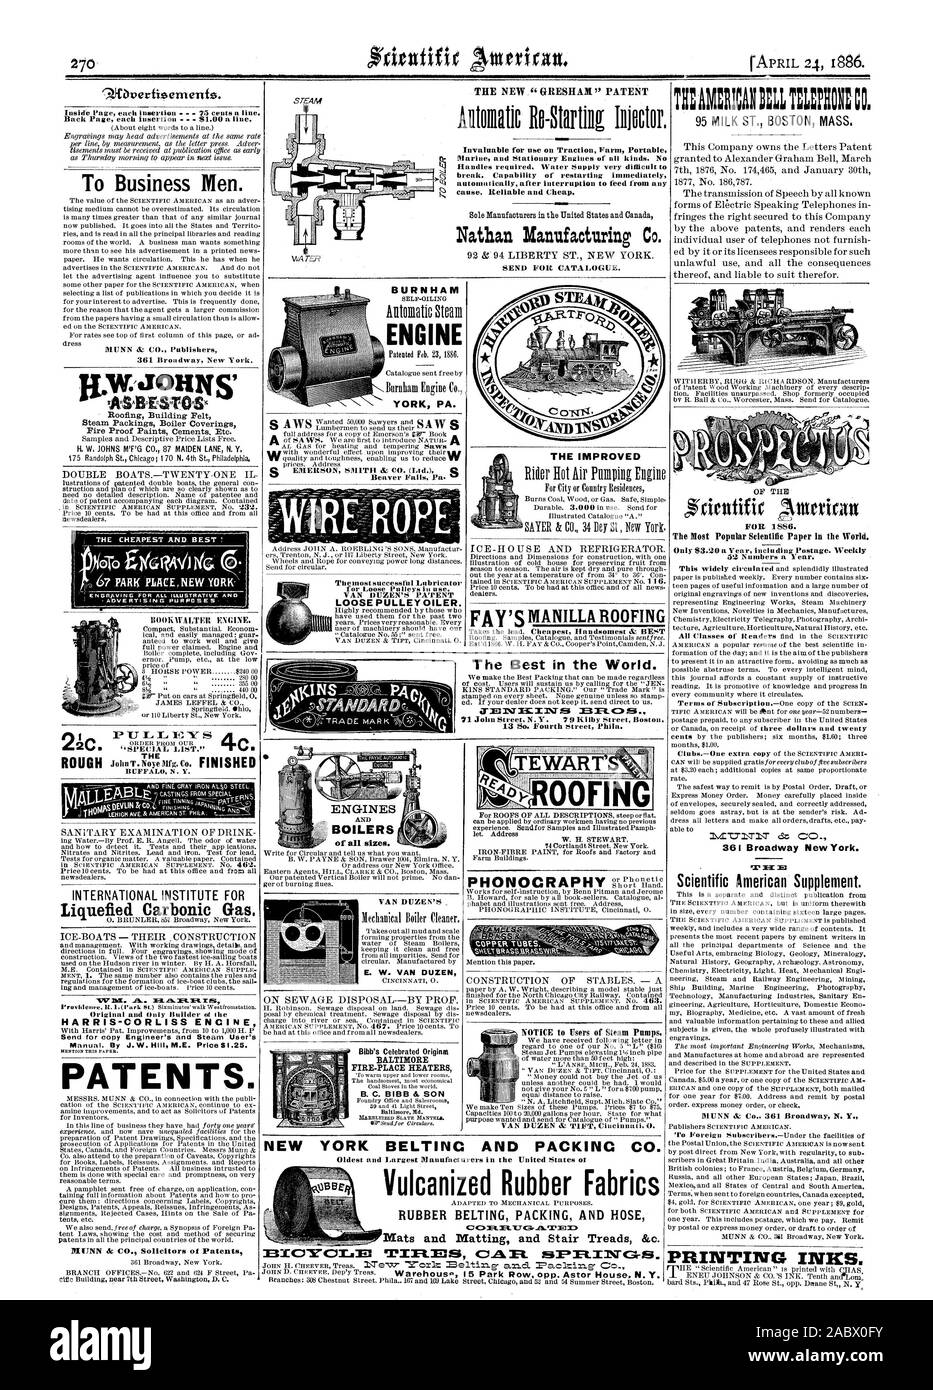 cause. Reliable and Cheap. Nathan Manufacturing Co. SEND FOR CATALOGUE. 95 MILK ST. BOSTON MASS. Steam Packings Boiler Coverings Fire Proof Paints Cements Etc. Beaver Falls Pa. Themost successful Lubricator for Loose Pulleys use. VAN DUZEN'S PATENT LOOSE PULLEY OILER. BOILERS of all sizes. VAN DUZEN'S Mechanical Boiler Cleaner. E. W. VAN DOZEN Bibb's Celebrated Originta FIRE-PLACE HEATERS THE IMPROVED TEWART' OOFIN OF THE FOR 1886. Scientific American Supplement. THE INTERNATIONAL INSTITUTE FOR WV Ill C. A Ia. AR-RIM Original and Only Builder of the HARRIS-CORLISS ENGINE Manual. By J.W. Hill M Stock Photo